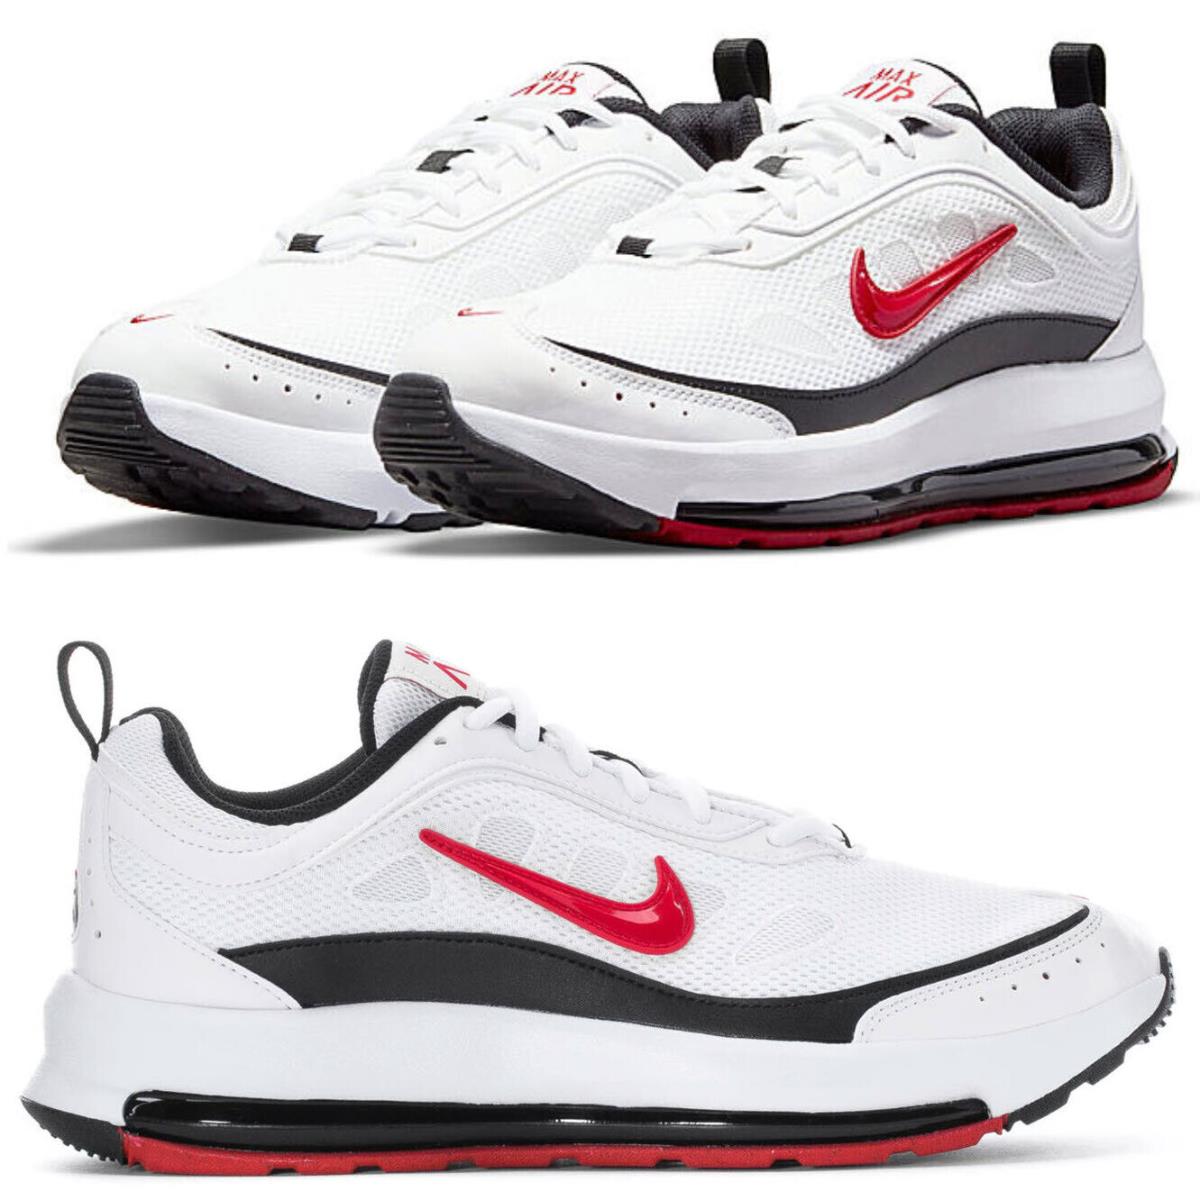 Nike Air Max AP Athletic Sneakers Shoes Casual Mens White Red Black Size 8